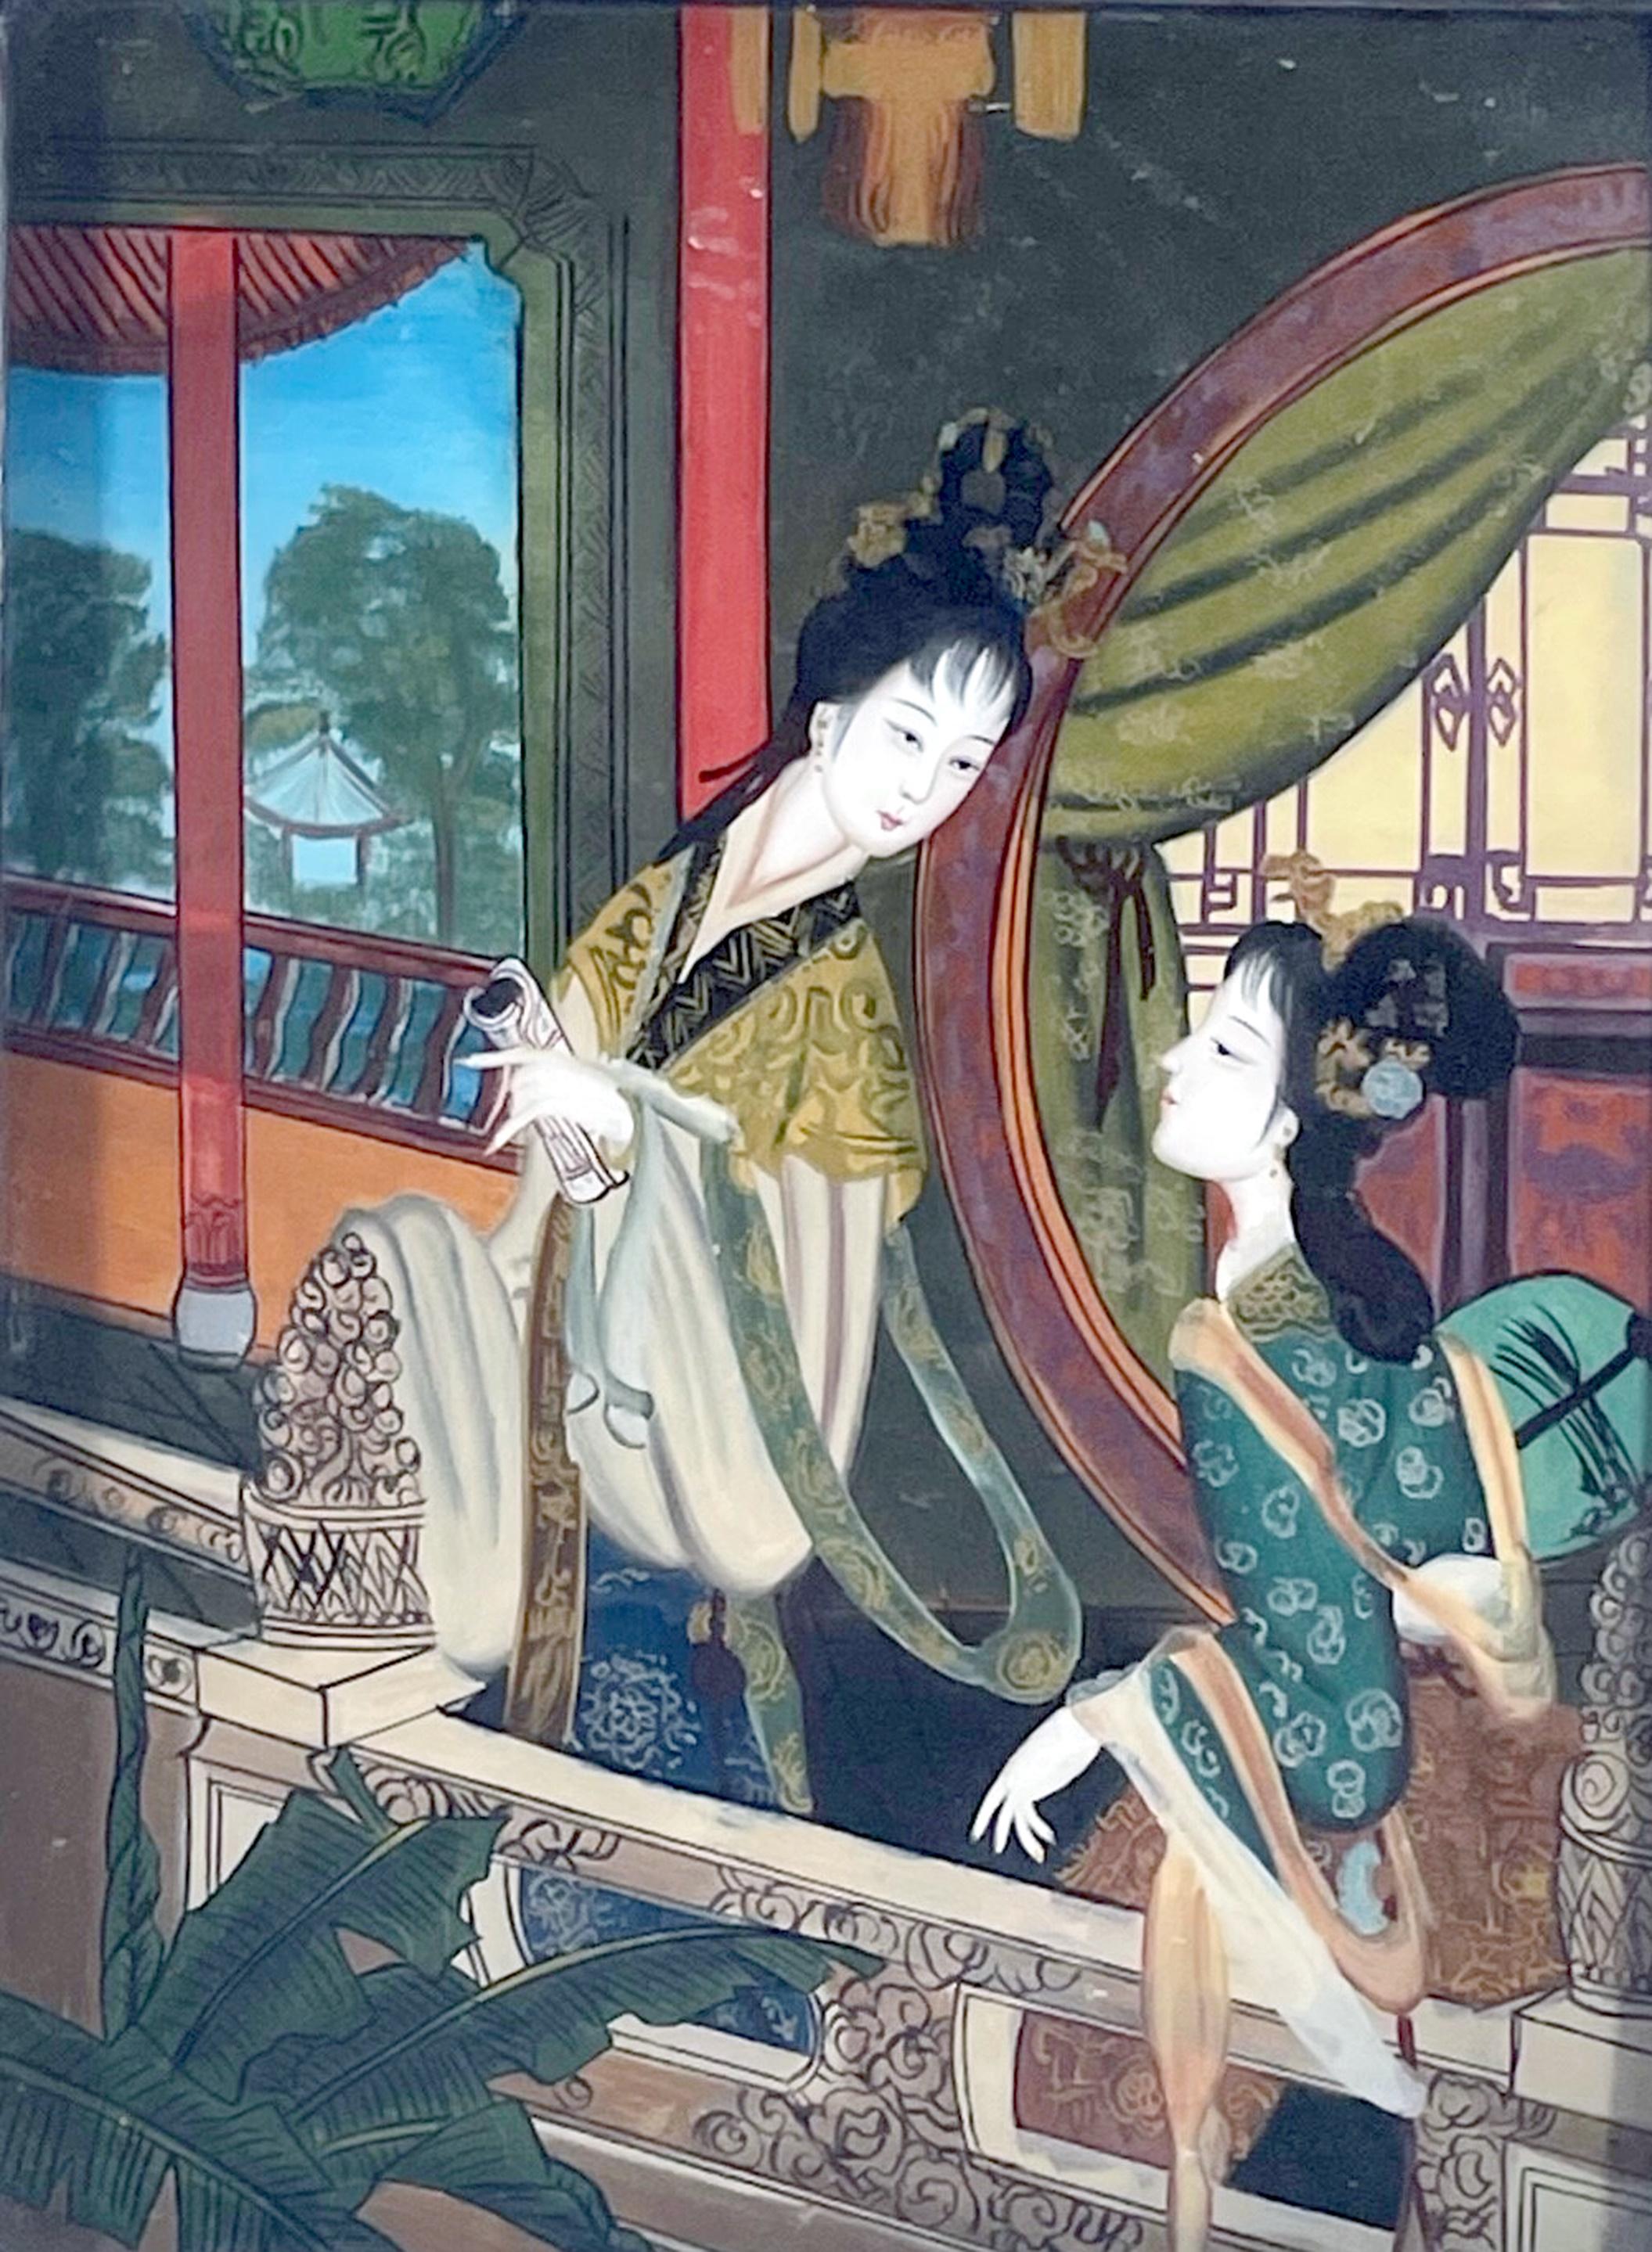 Antique Verre Eglomise Chinese Export reverse glass painting.

Beautiful Chinese reverse glass painting of two women in a Chinese garden with a scroll. This painting is particularly vibrant and exquisite in color and detail. The wood frame